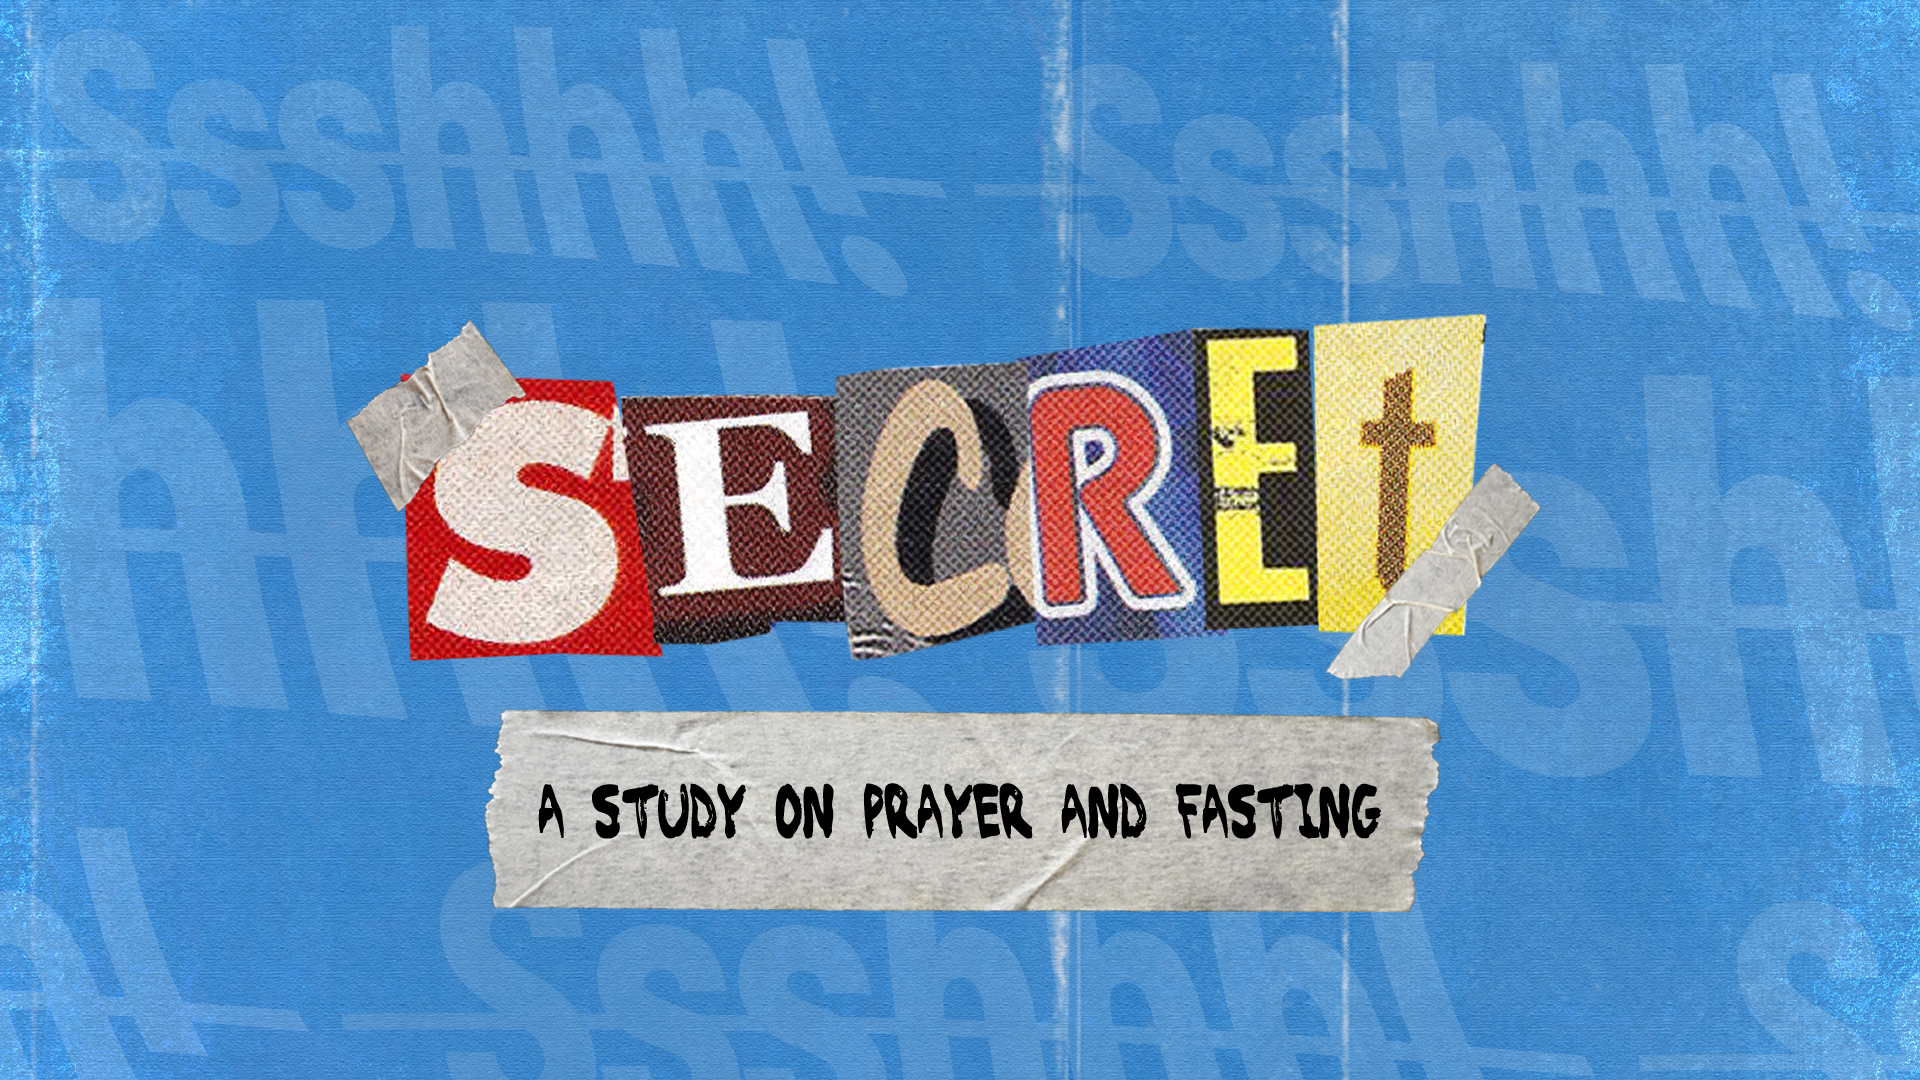 Secret: A Study on Prayer and Fasting